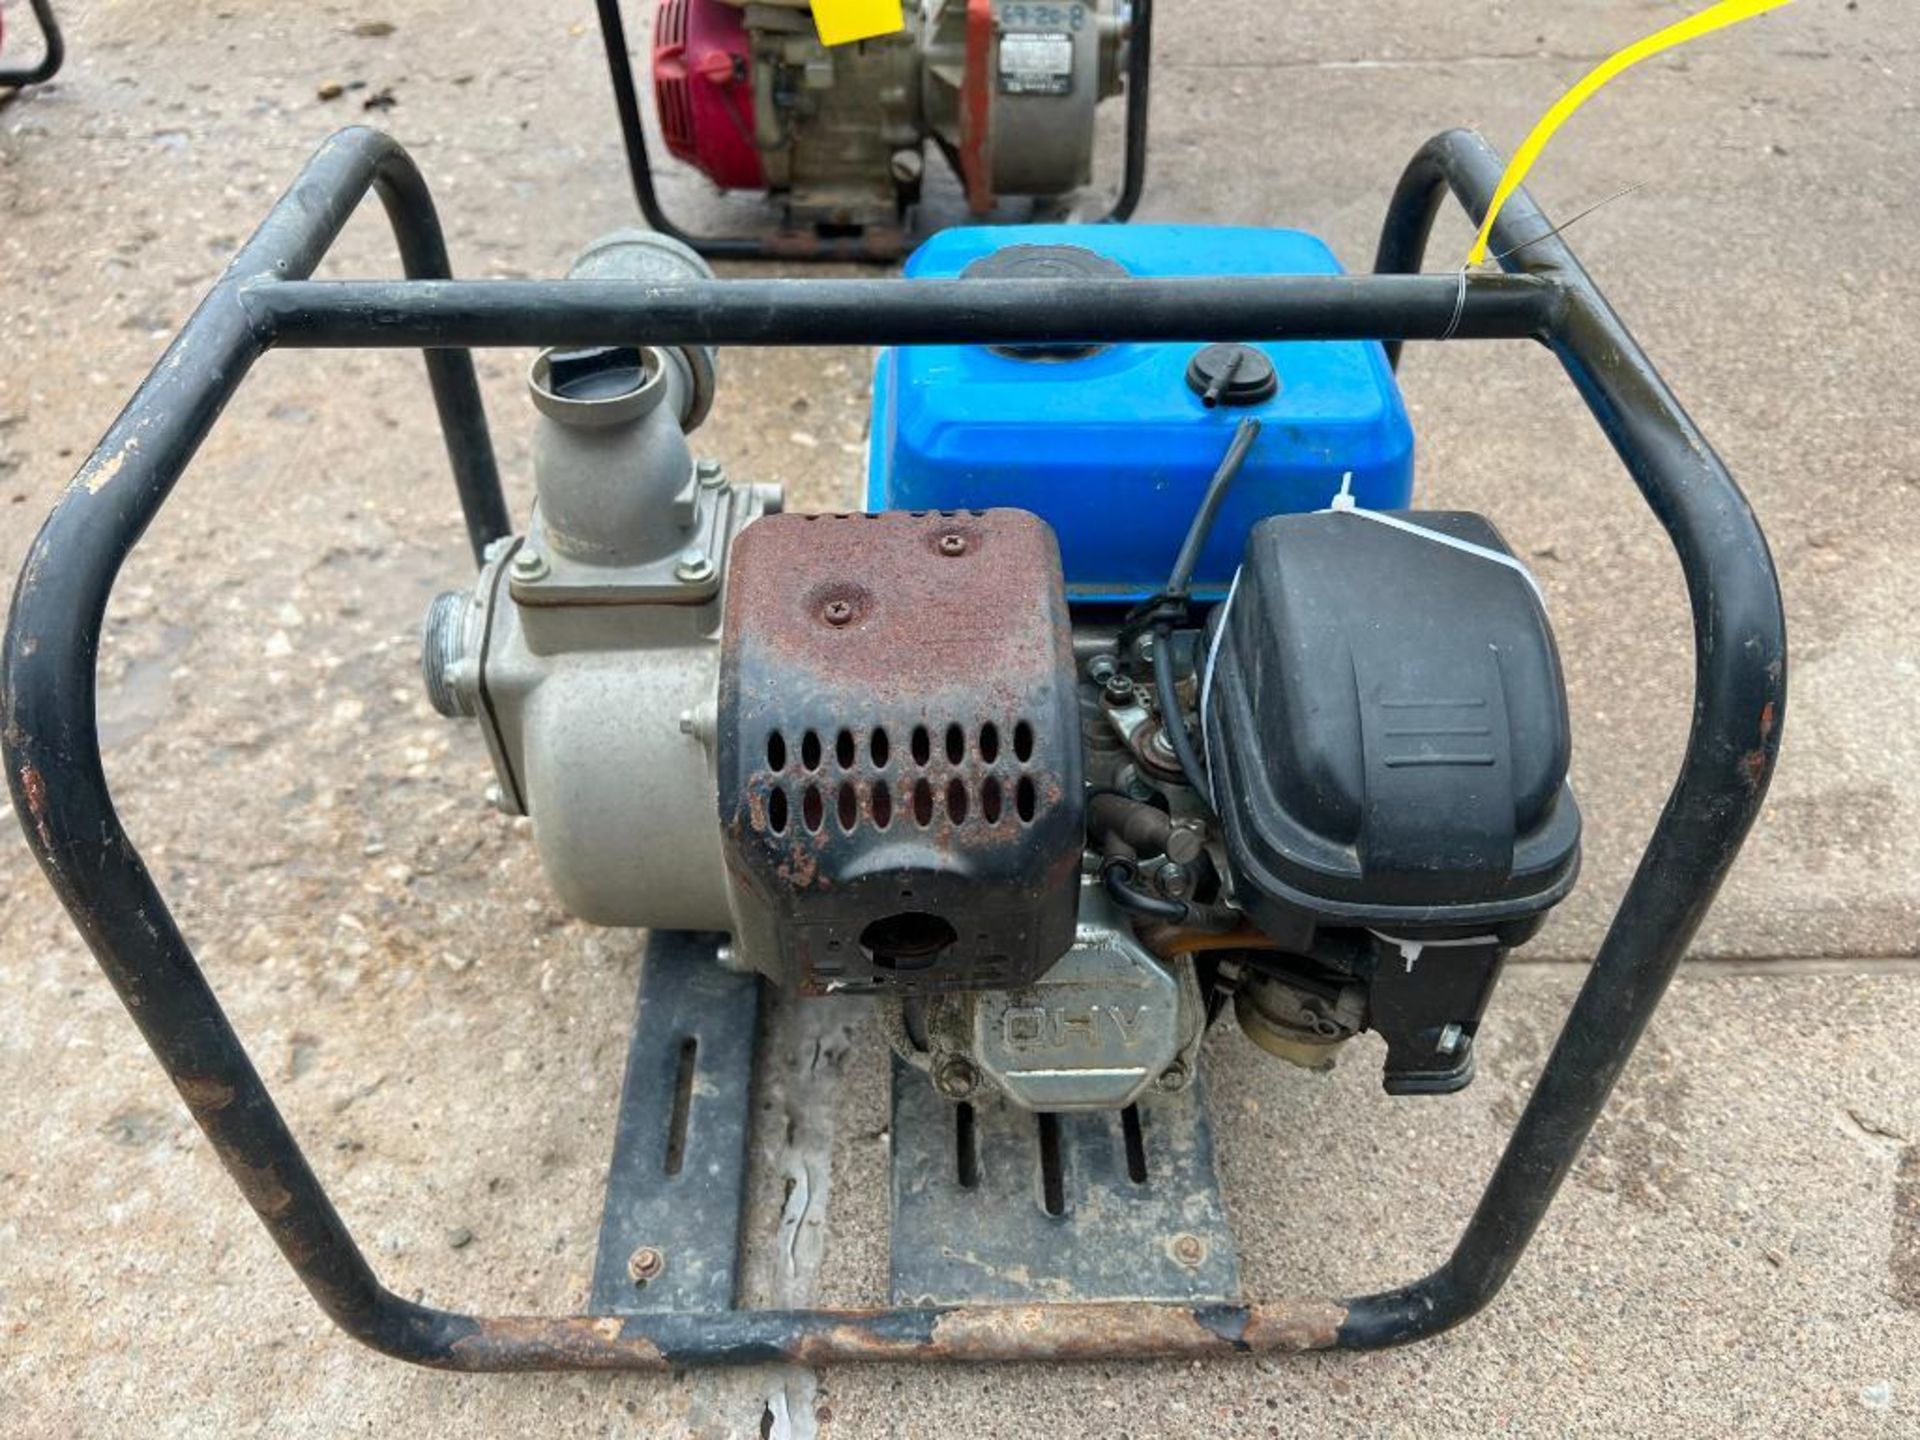 Pacific Hydrostar Clear Water Pump, 212 cc Gas Engine. Located in Mt. Pleasant, IA - Image 3 of 3